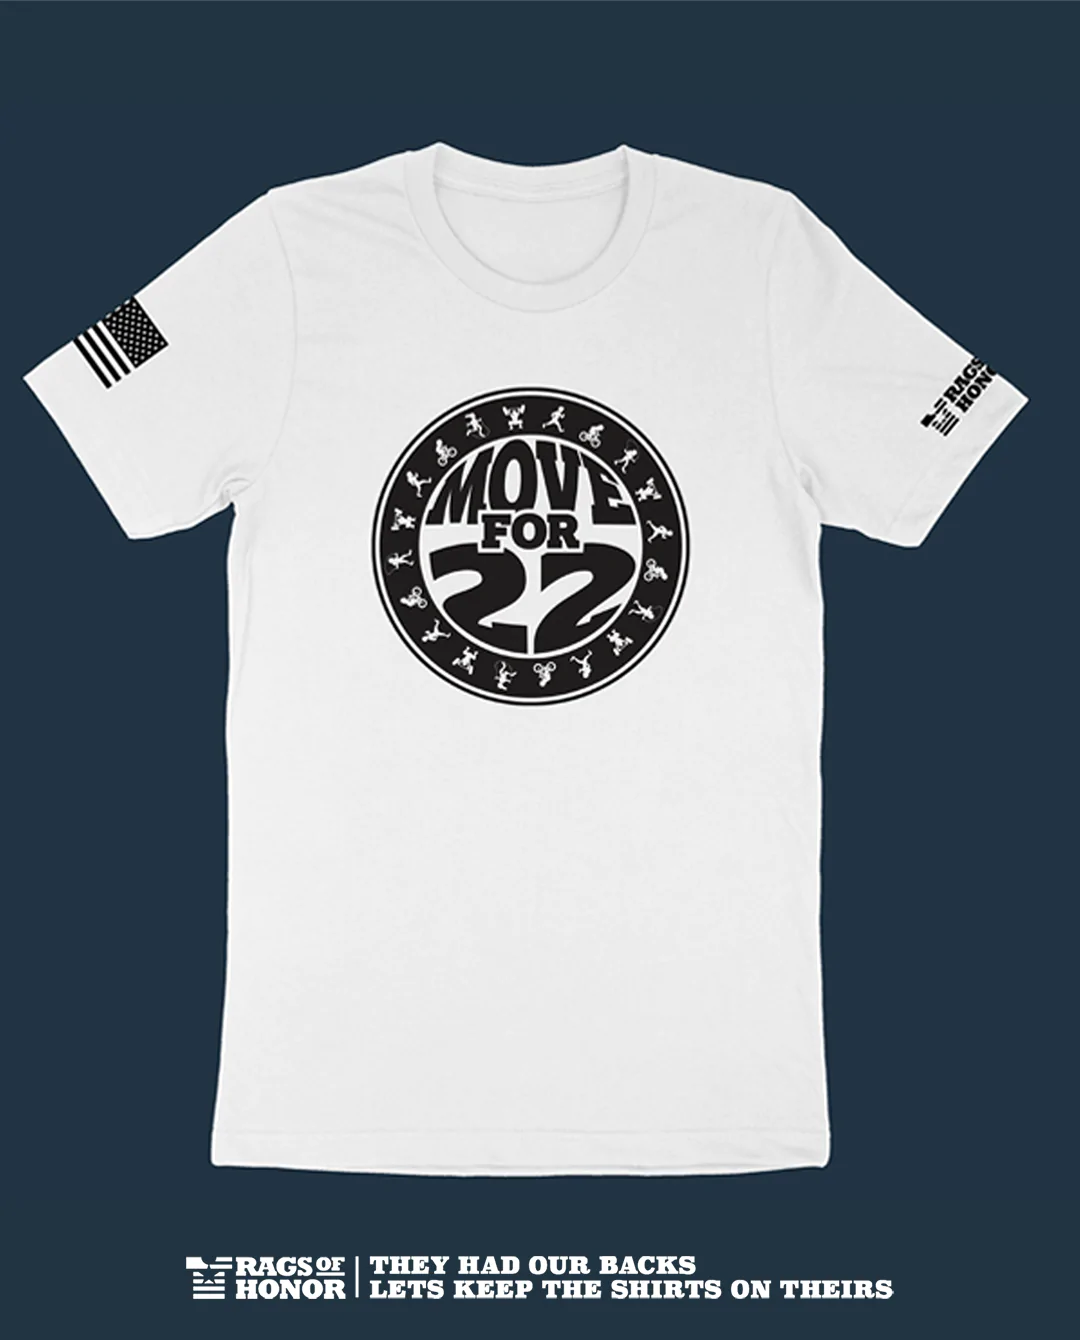 Rags of Honor Move for 22 T-shirt (Unisex) posted by ProdOrigin USA in Unisex Apparel